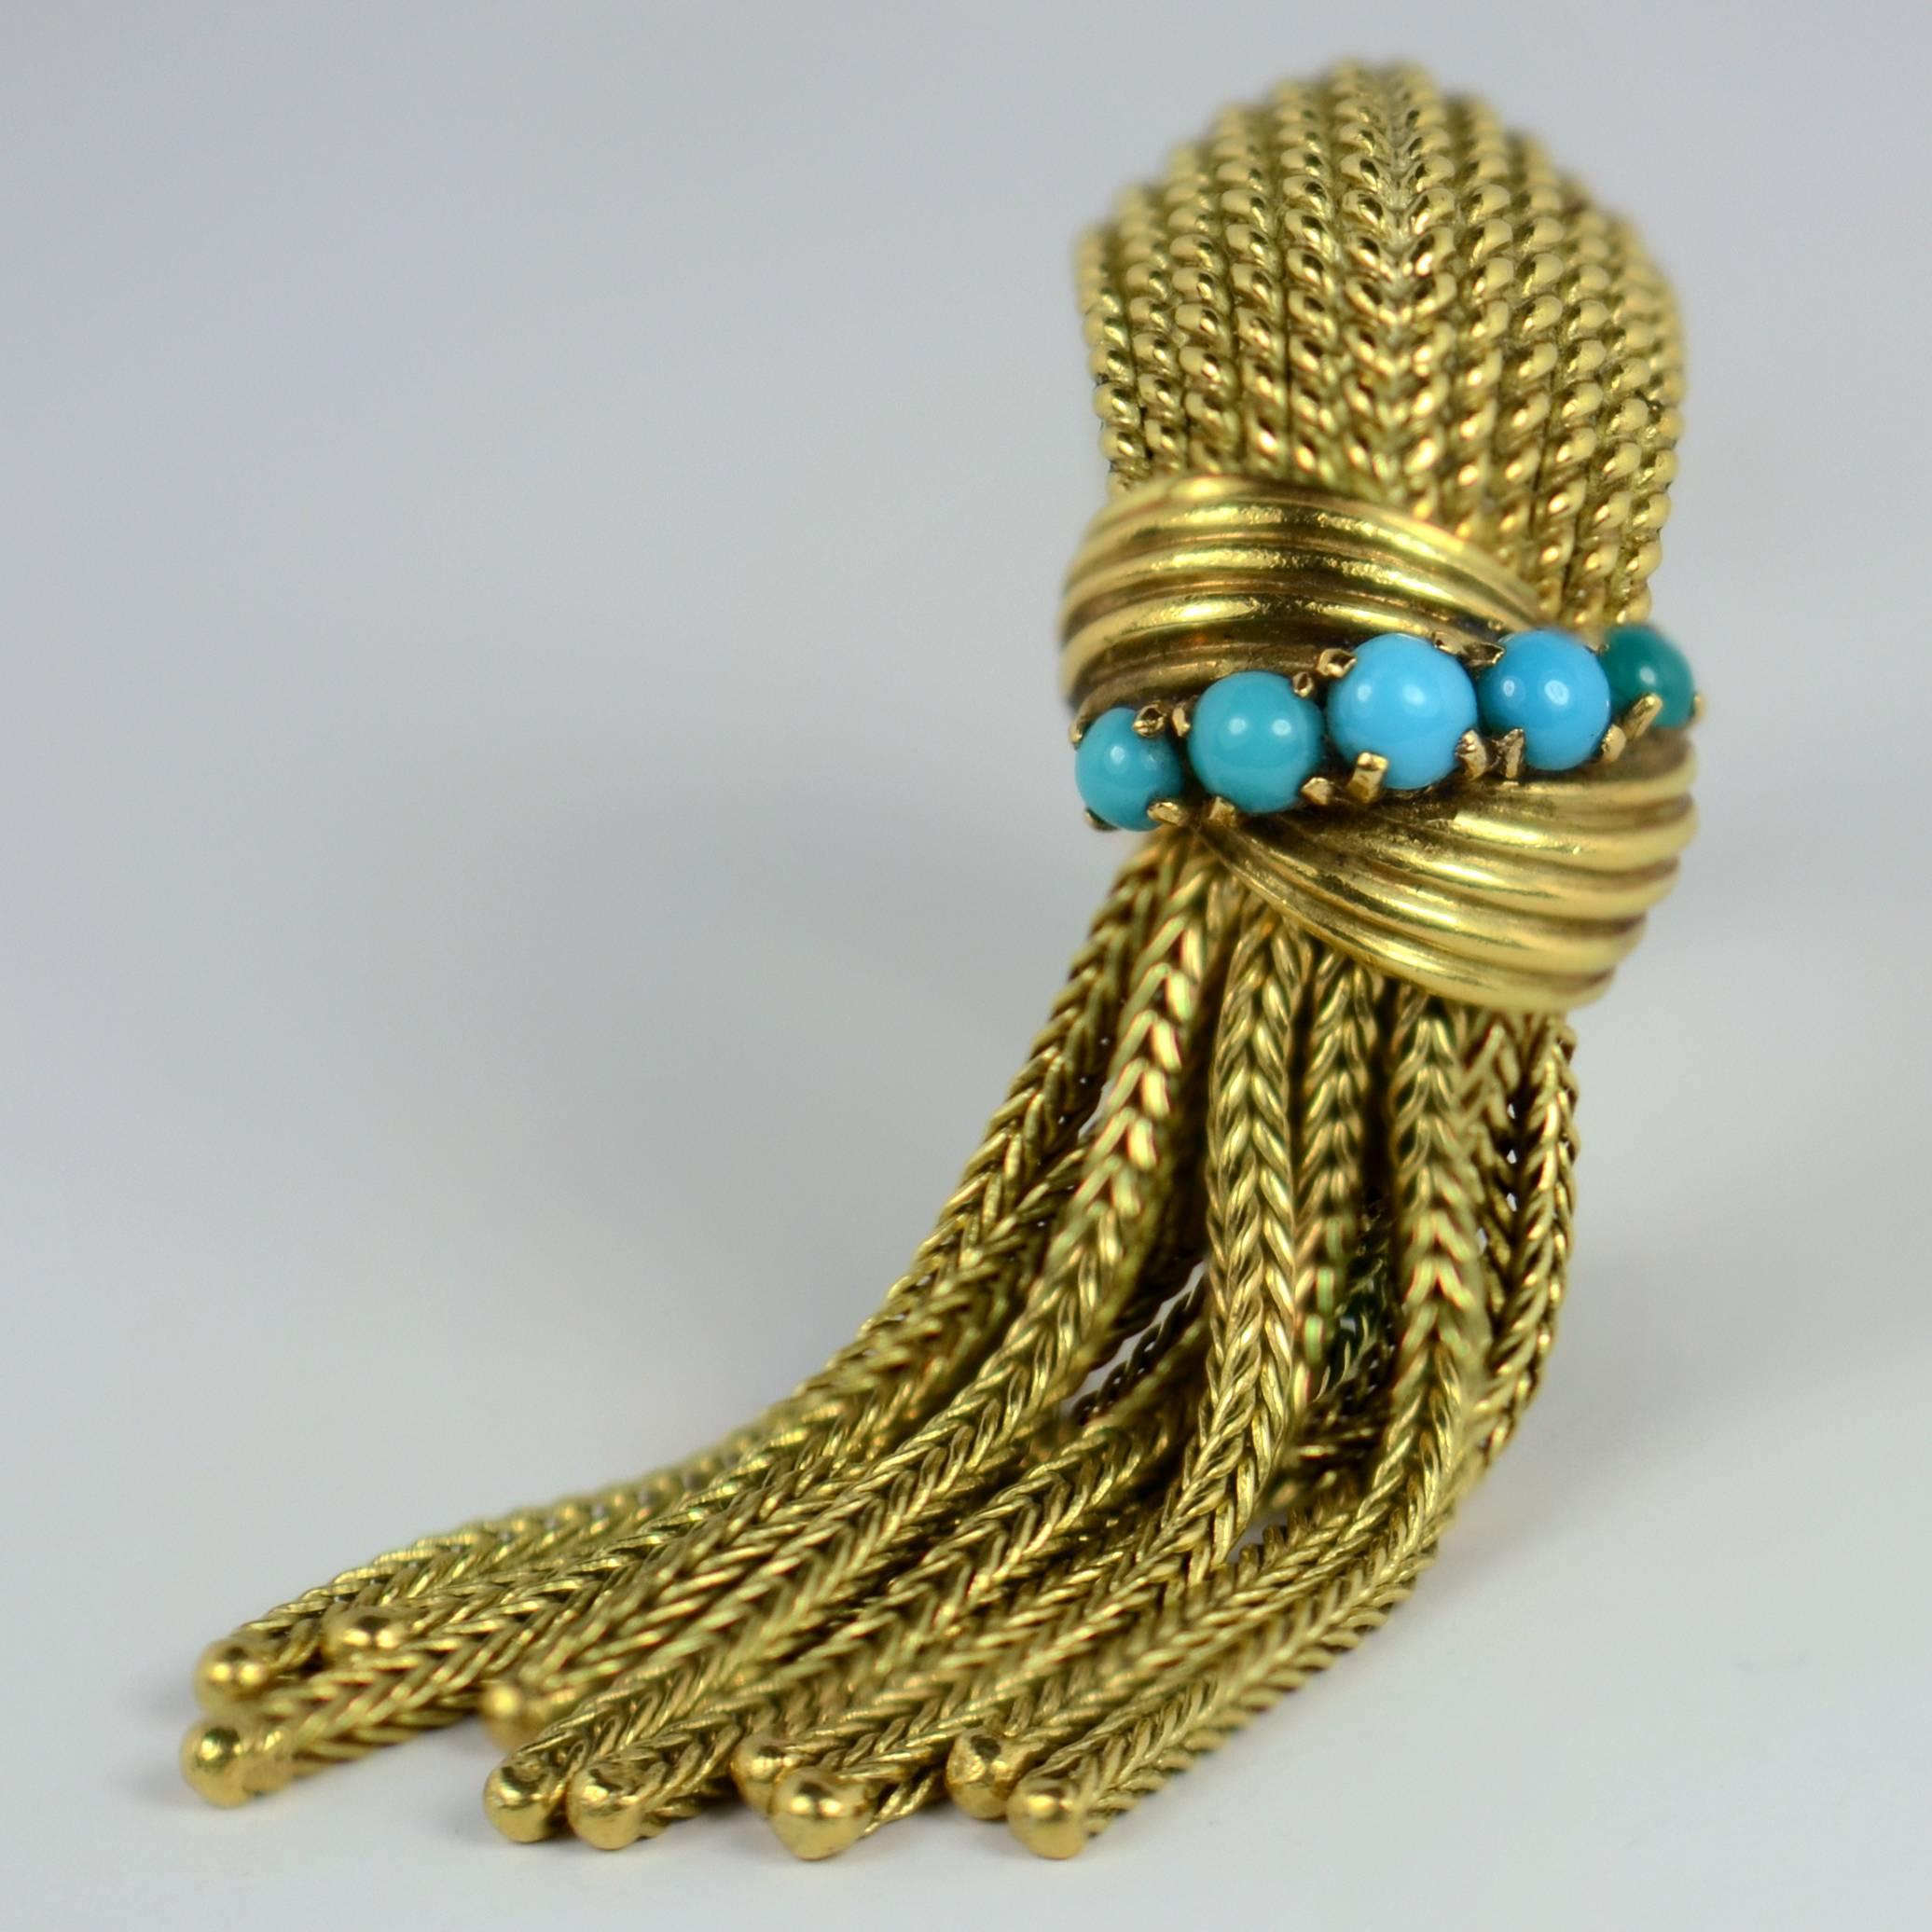 A chic pinky ring signed Mellerio in 18 karat gold set with five turquoise above a fringe tassel.  The ridged dome ring is designed as twists of gold to give a braided effect, with a double twist of gold highlighted with turquoise cabochons above a